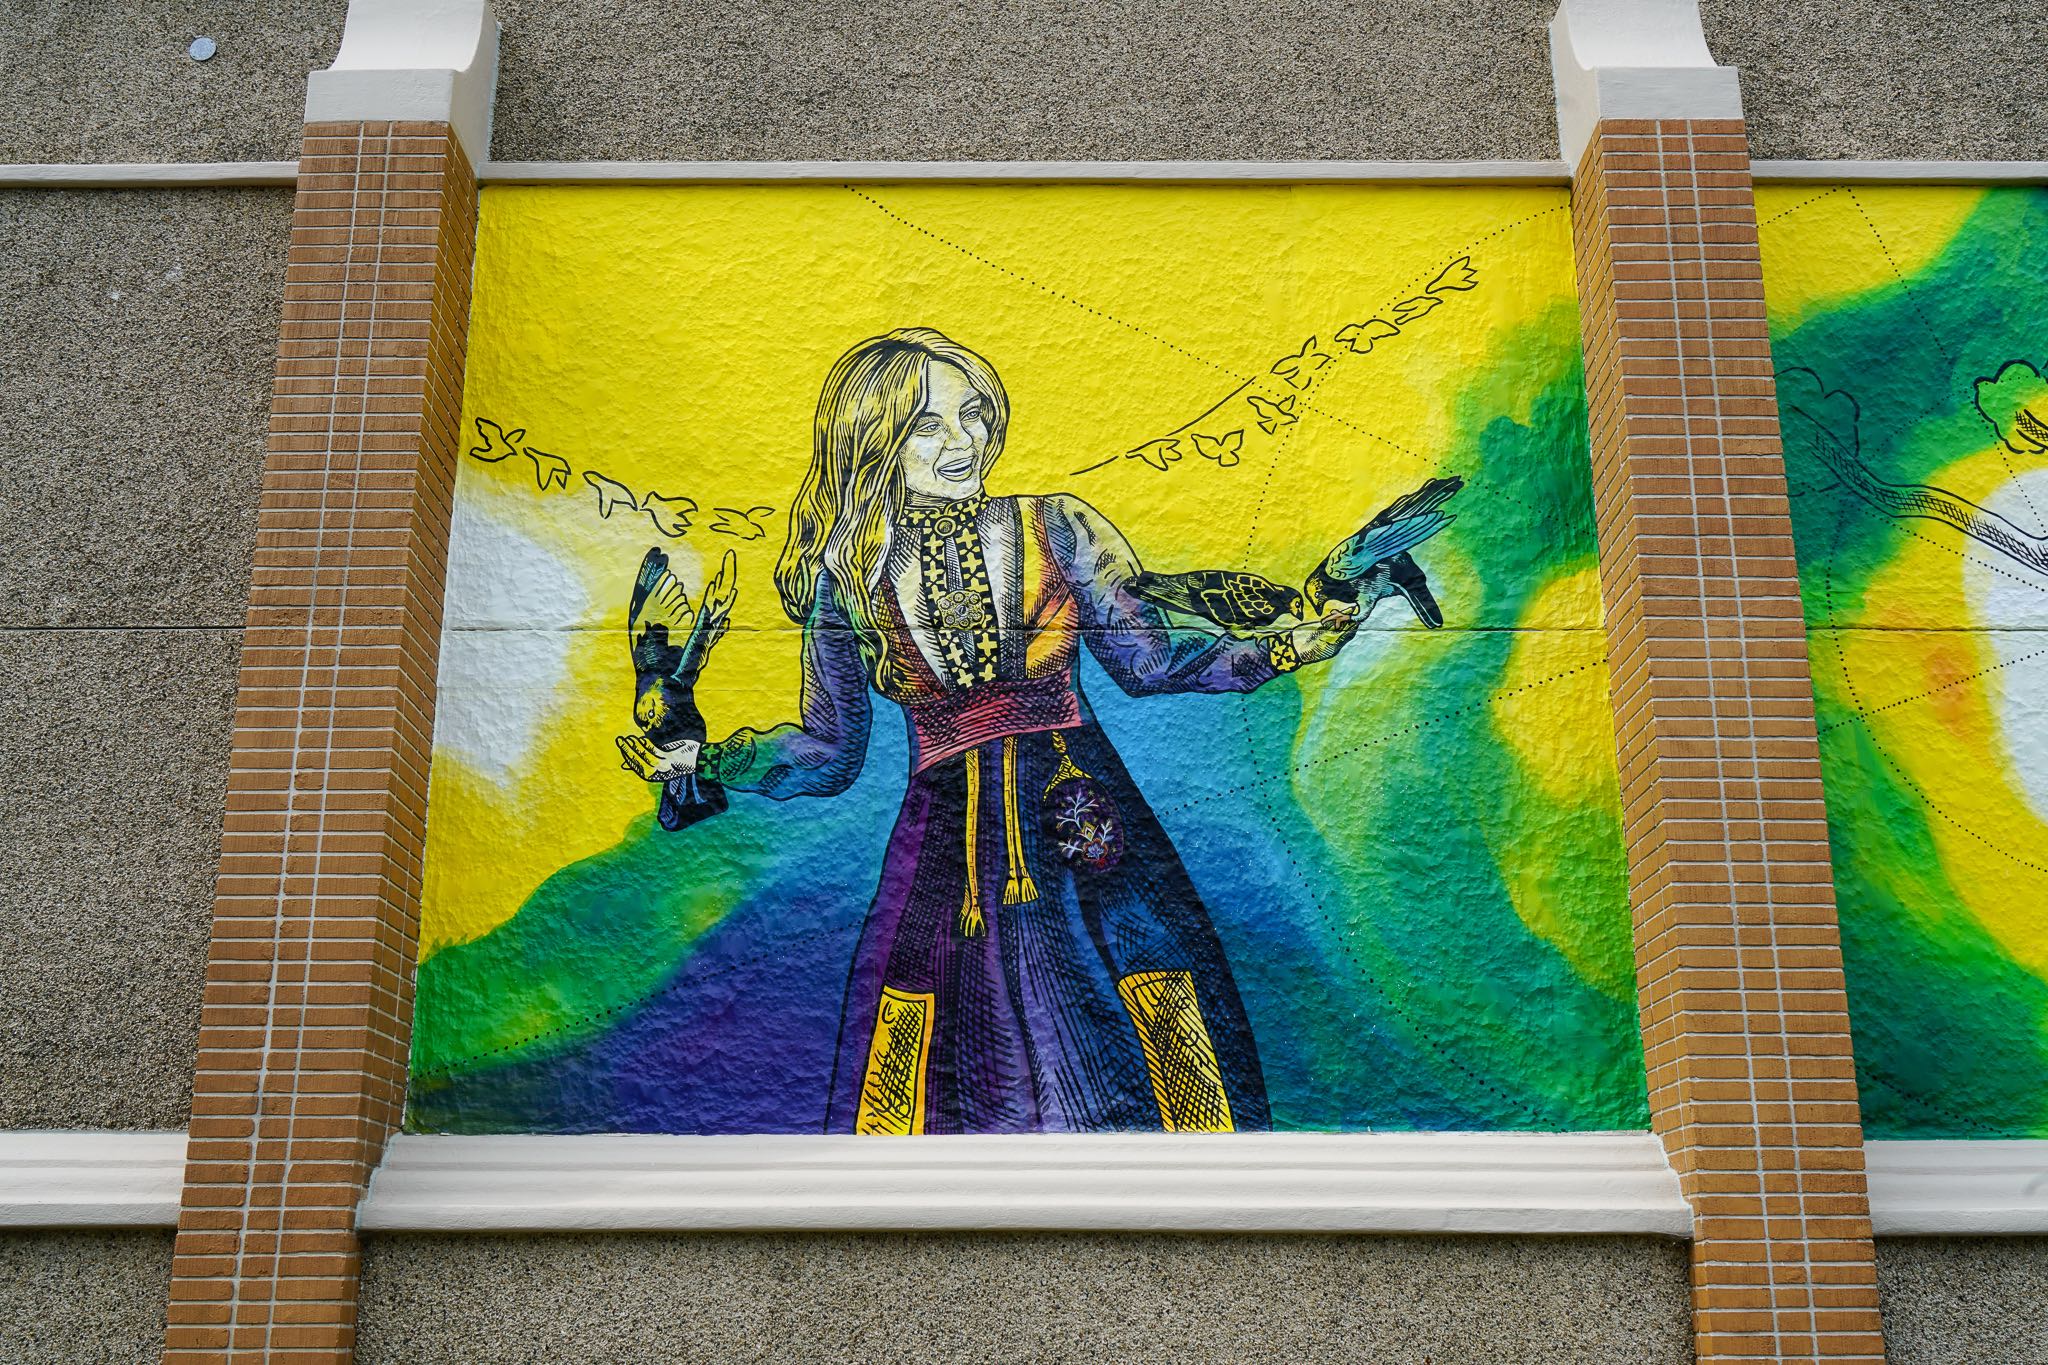 Giant Mural at Lutheran Church with Woman in Cultural Clothing